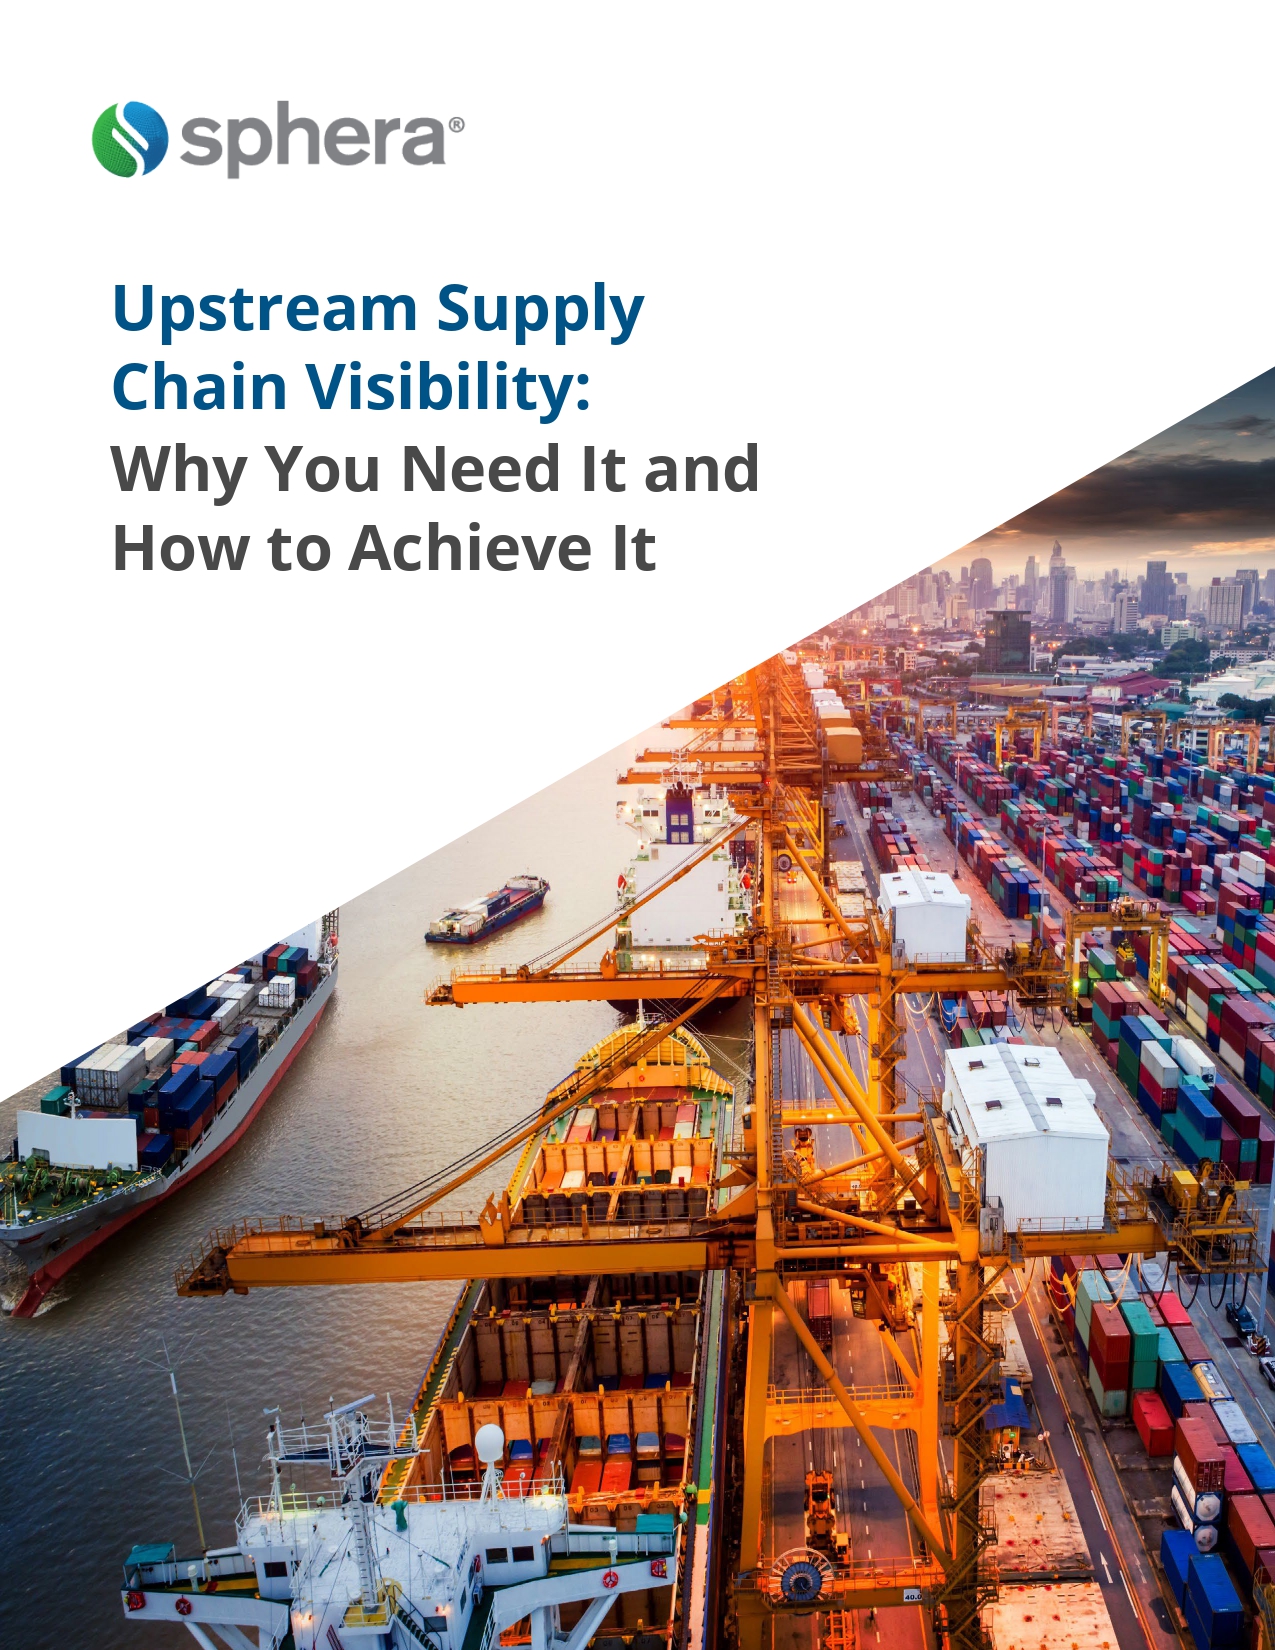 Upstream Supply Chain Visibility: Why You Need It and How to Achieve it